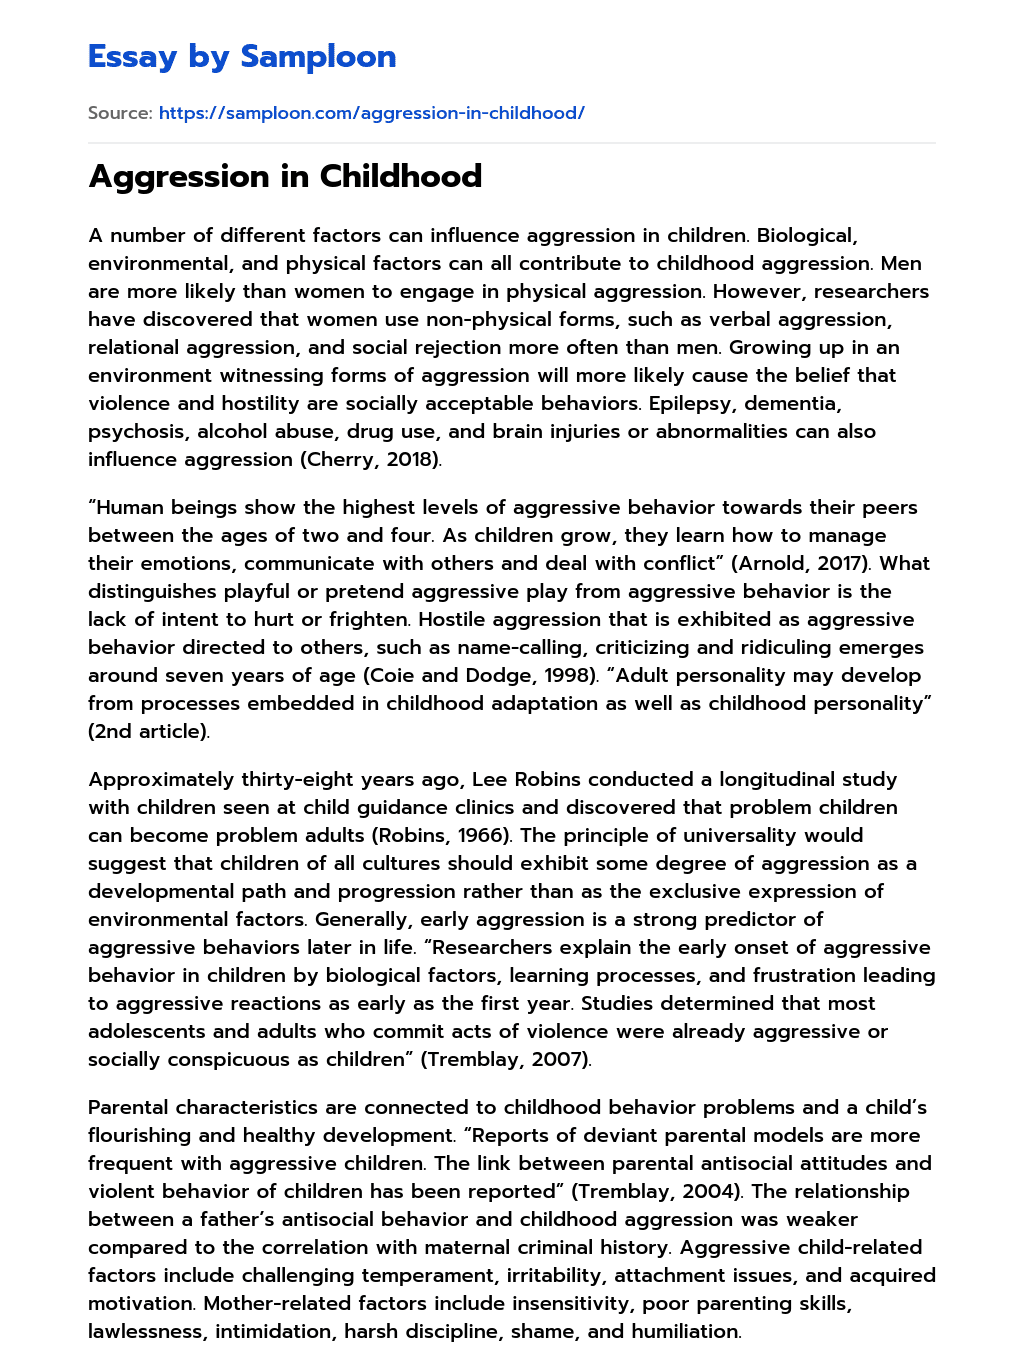 Aggression in Childhood essay